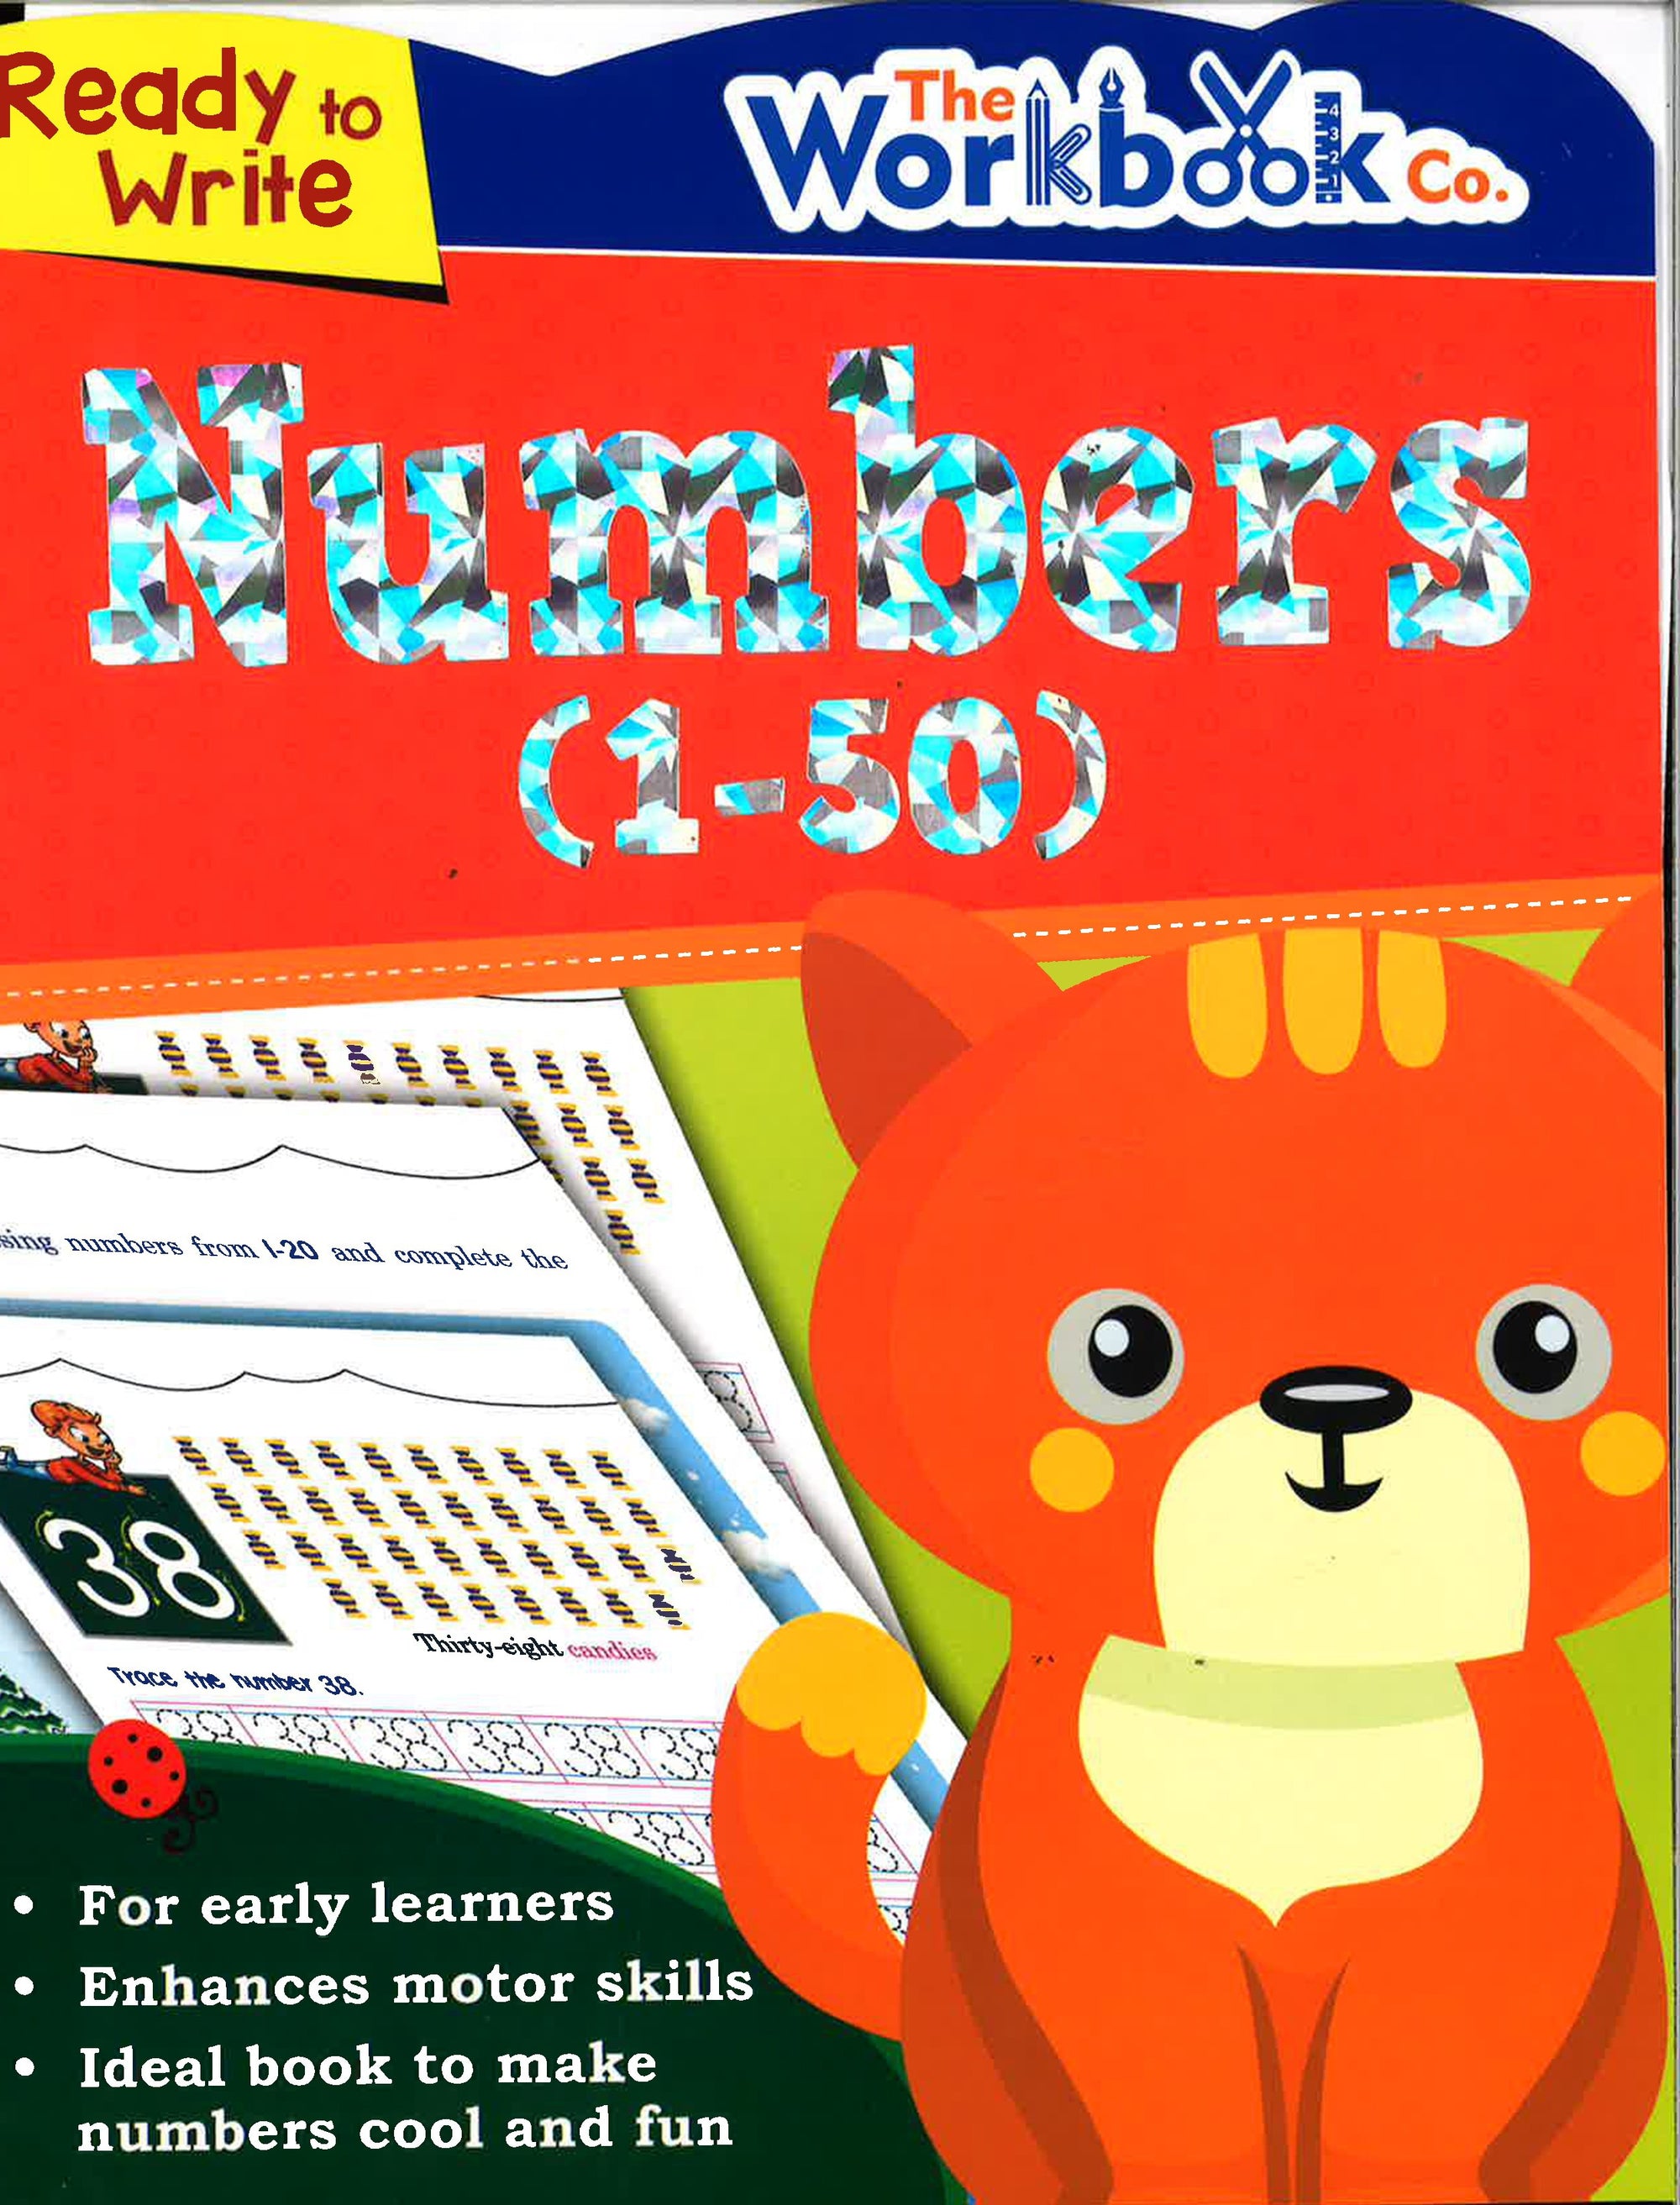 numbers-1-50-big-bad-wolf-books-sdn-bhd-philippines